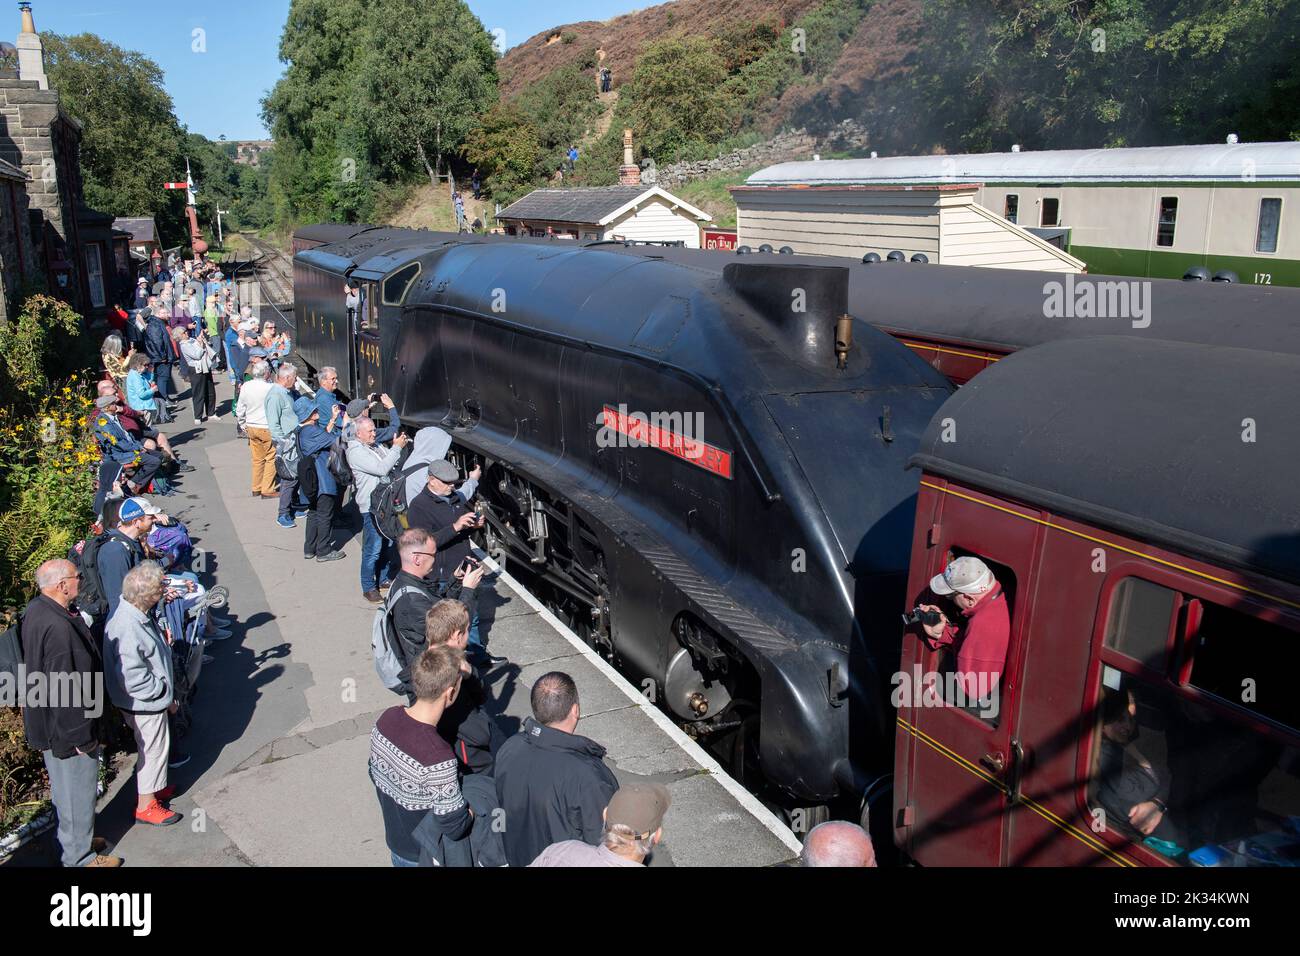 No.4498 Sir Nigel Gresley in Goathland station on the North Yorkshire Moors Railway at the annual steam gala. Stock Photo